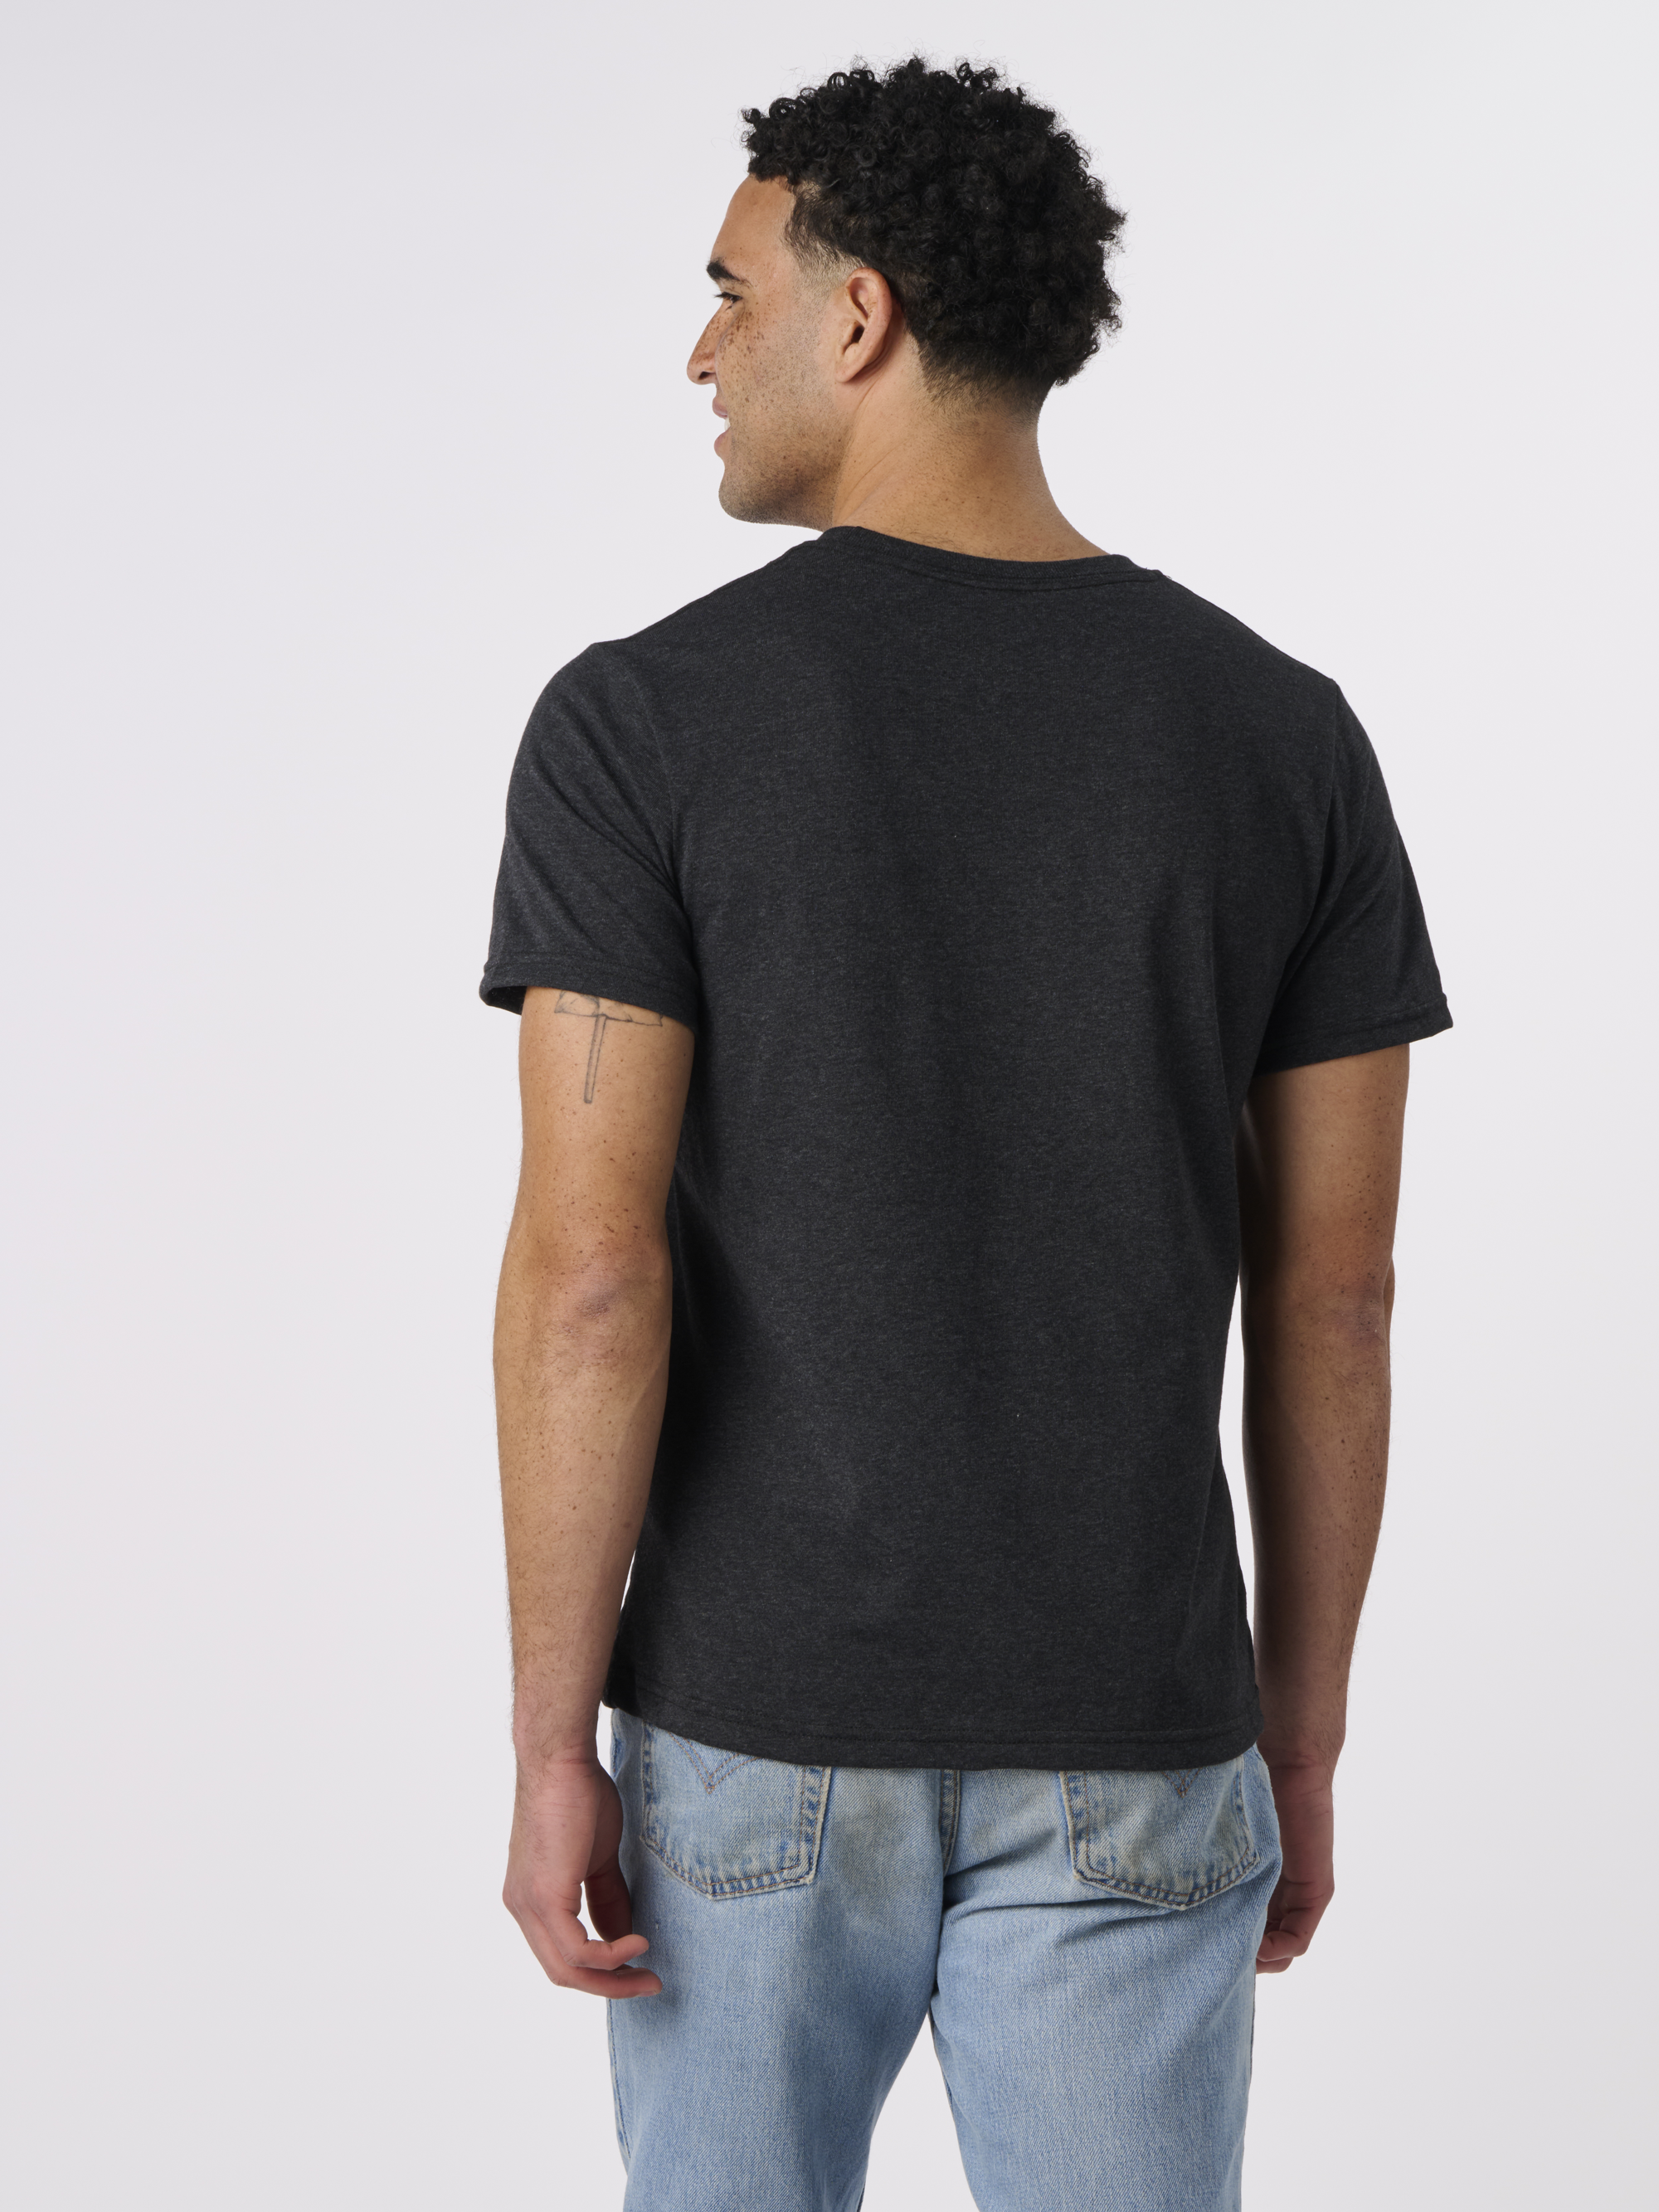 RECOVER_RS100_CLASSICSHORTSLEEVETSHIRT_CARBON_BACK.png